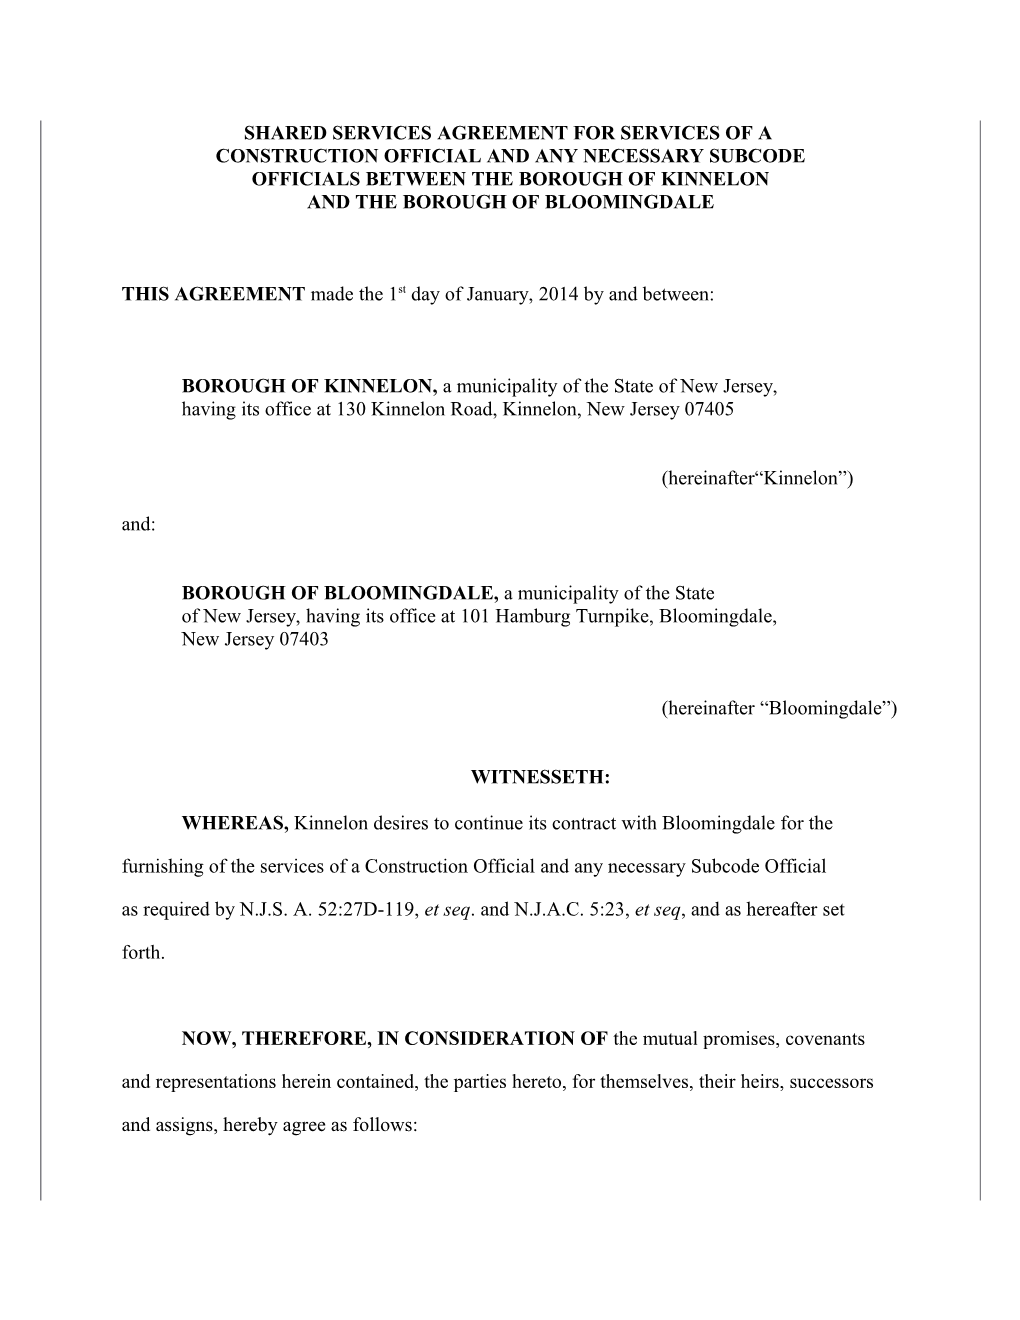 Shared Services Agreement for Services of A